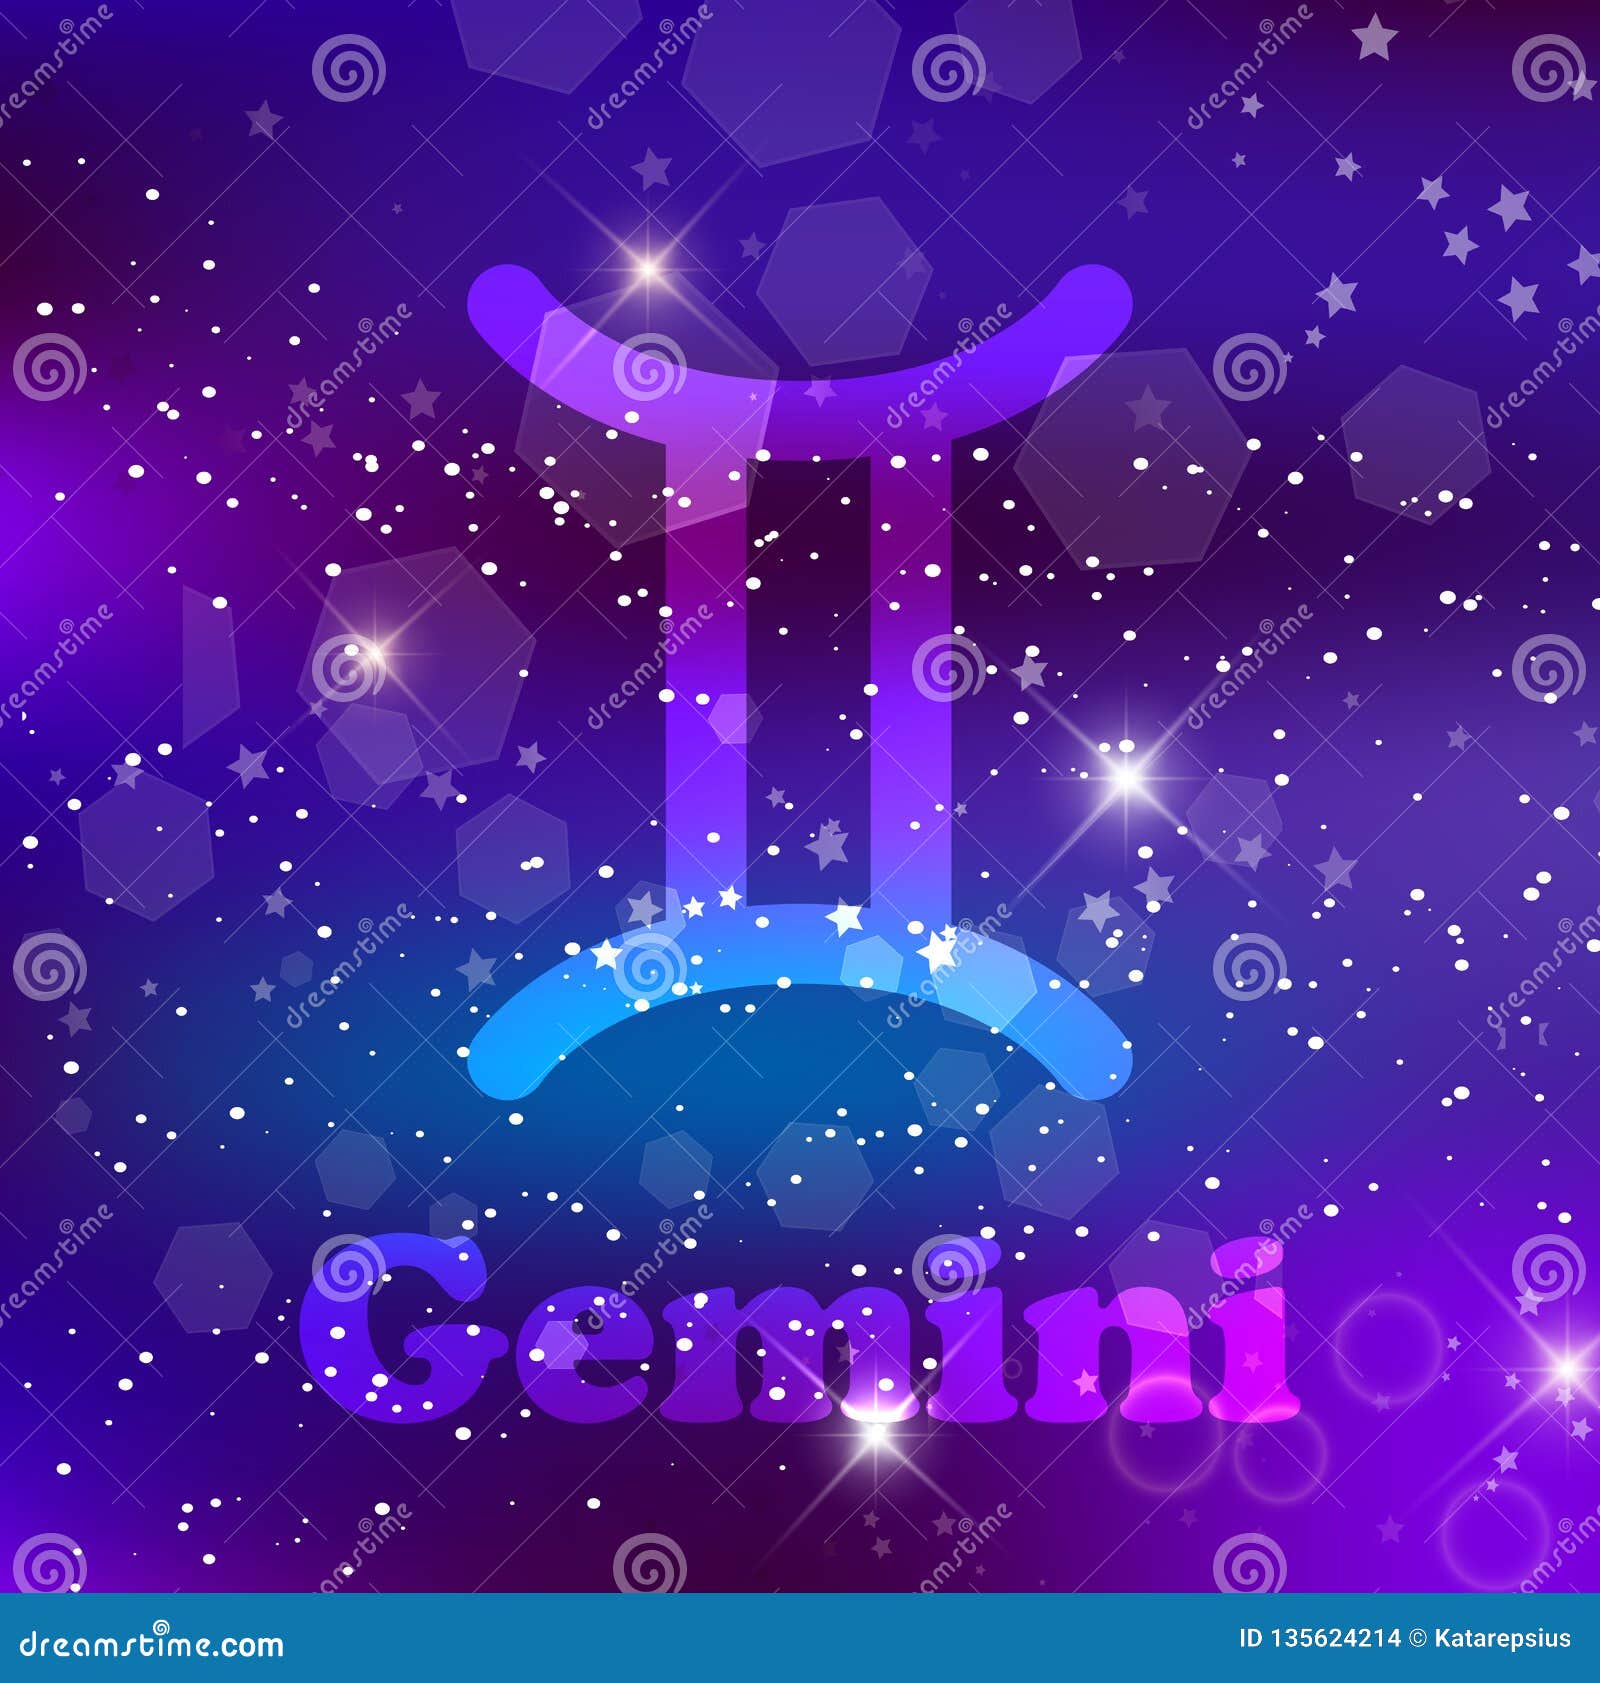 Gemini Zodiac Sign on a Cosmic Purple Background with Sparkling Stars ...